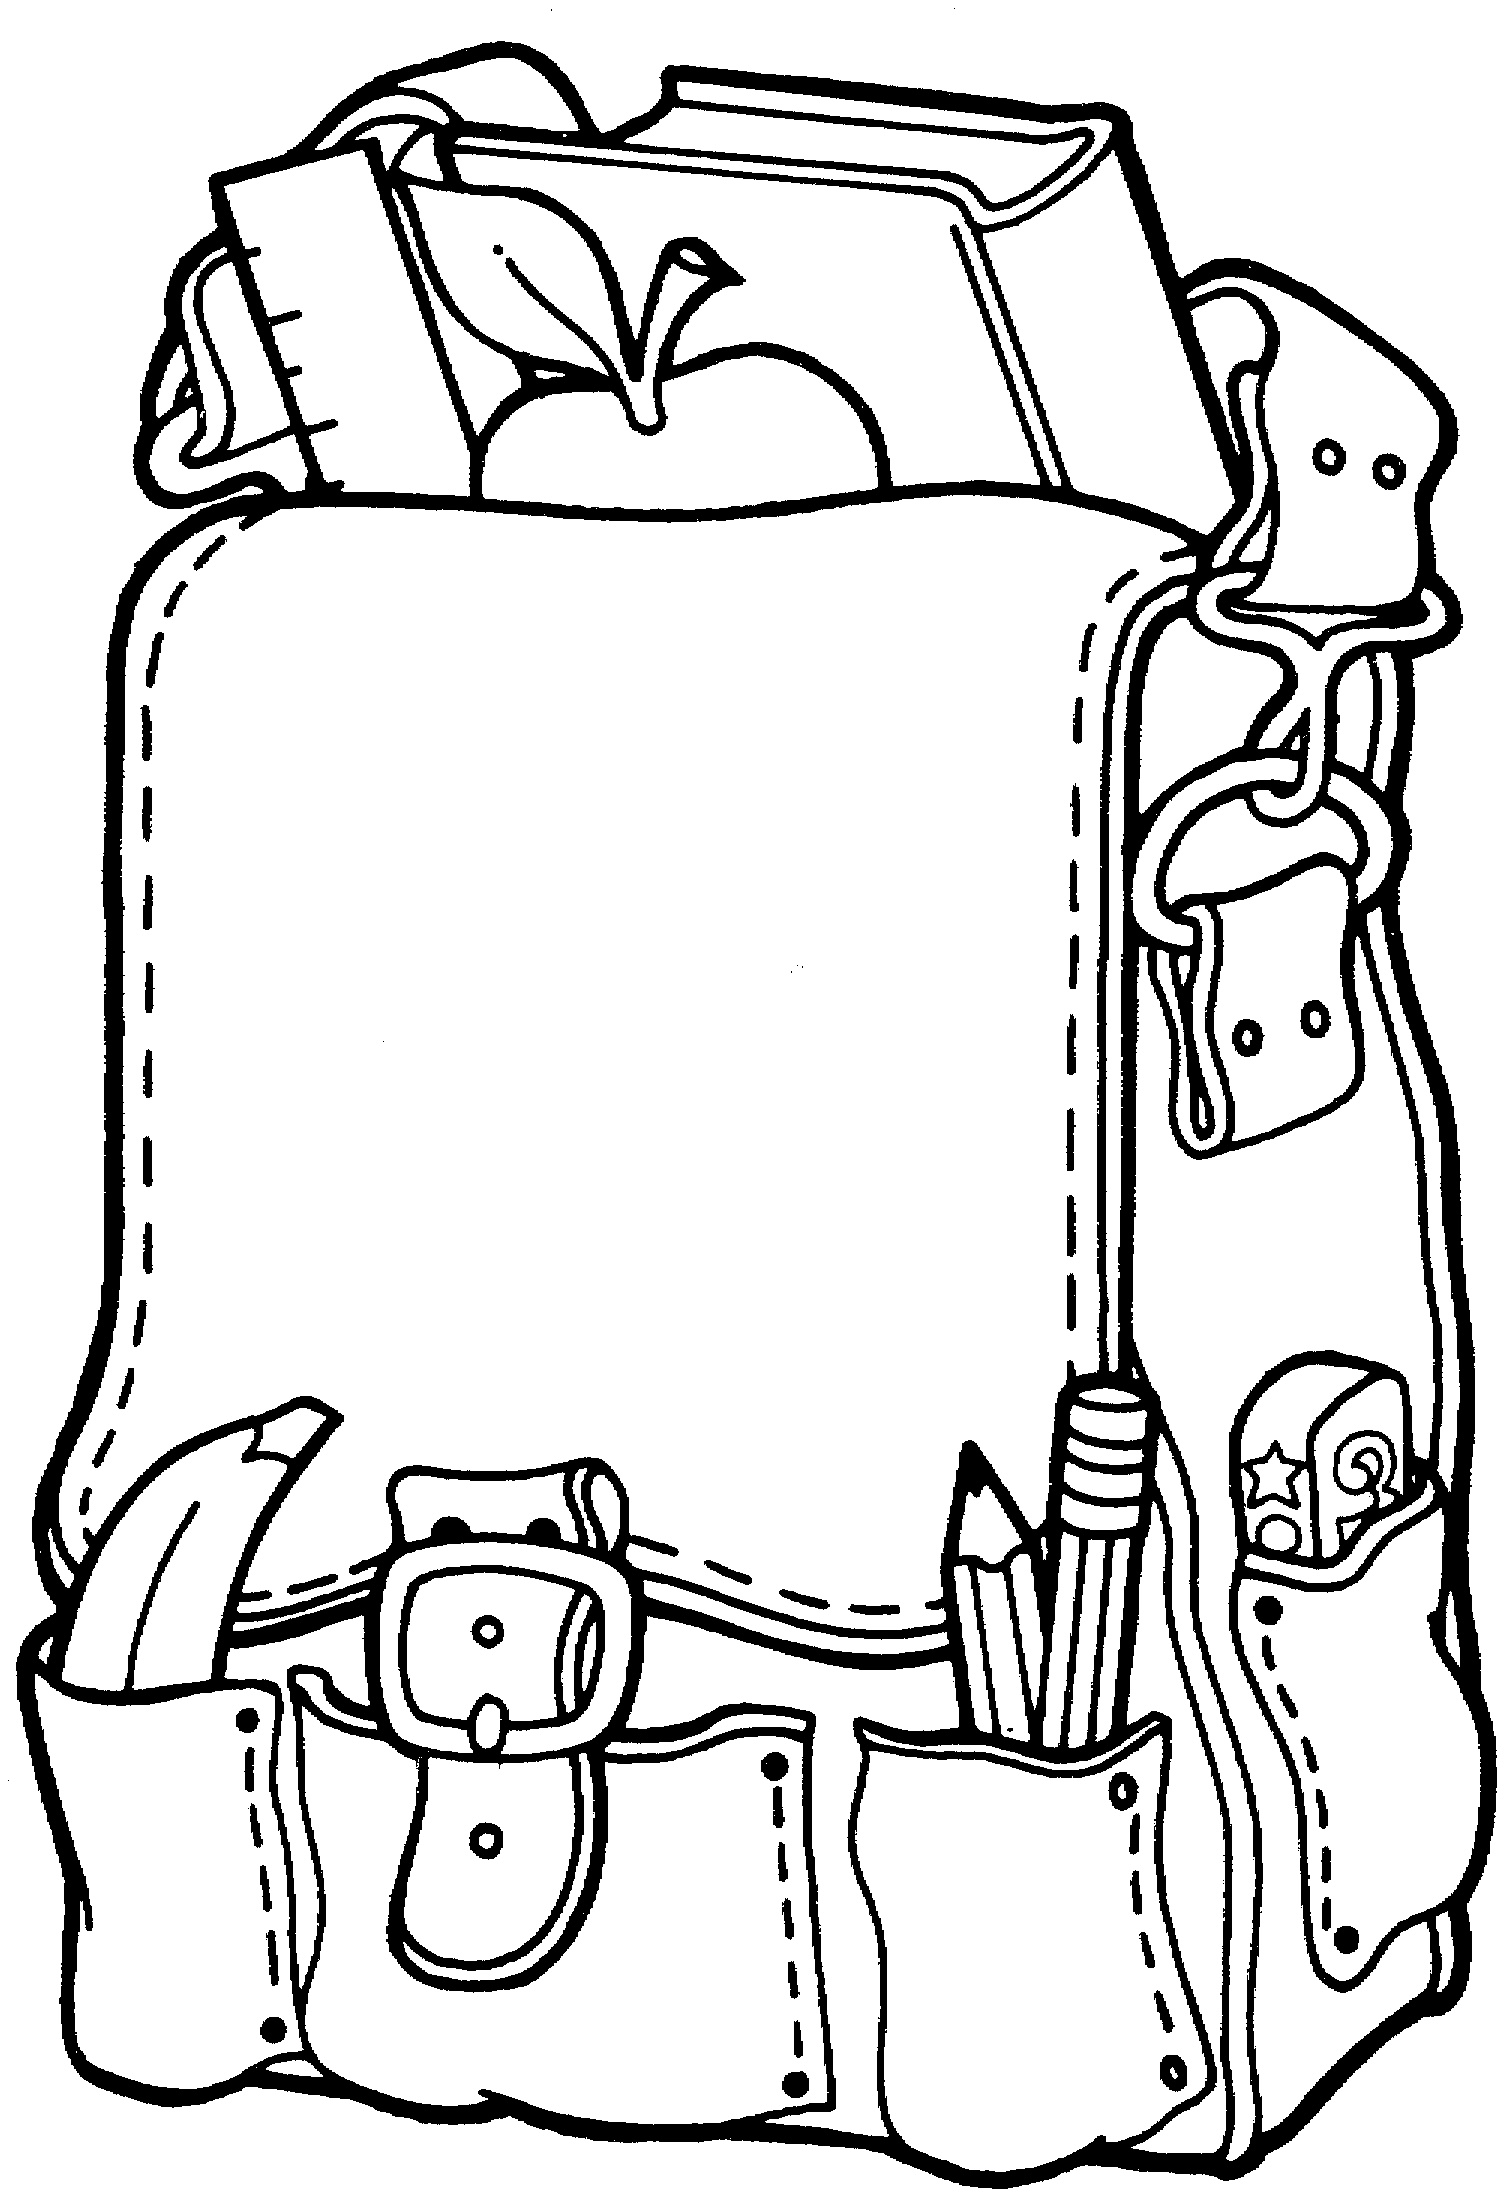 Backpack clipart printable. Free coloring pages for